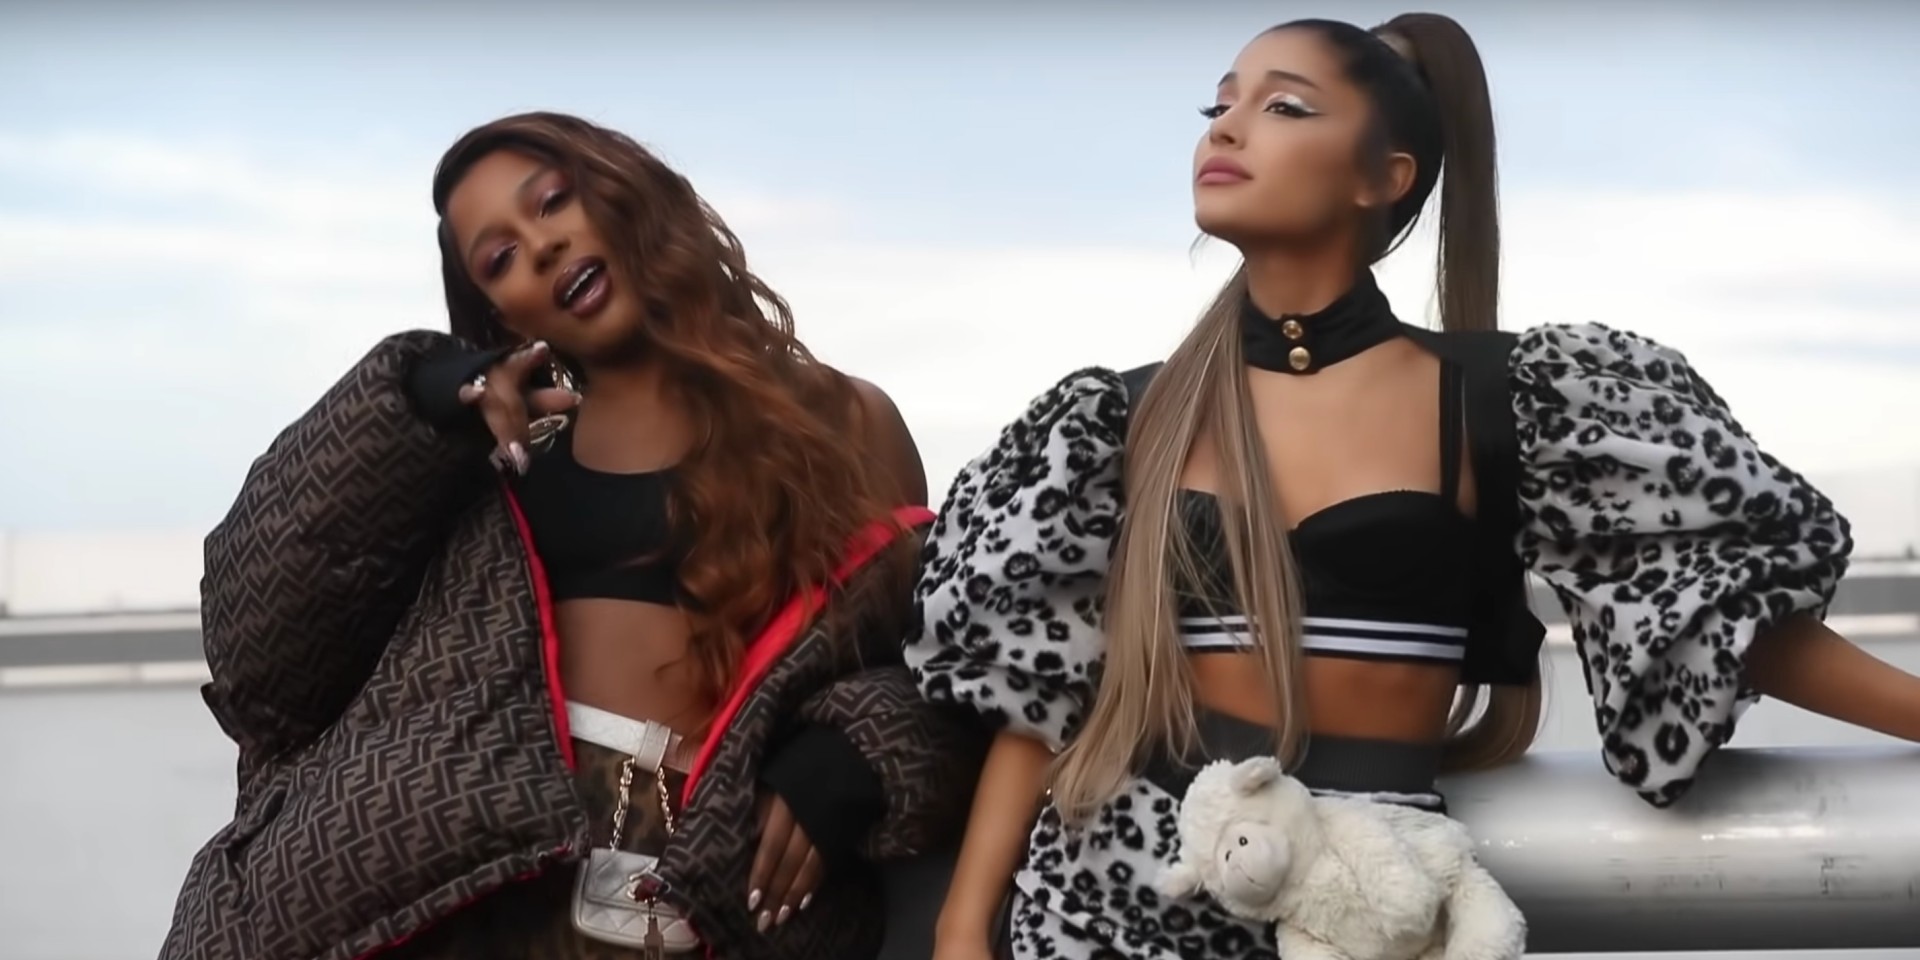 Ariana Grande and Victoria Monét share new single 'Monopoly' – watch